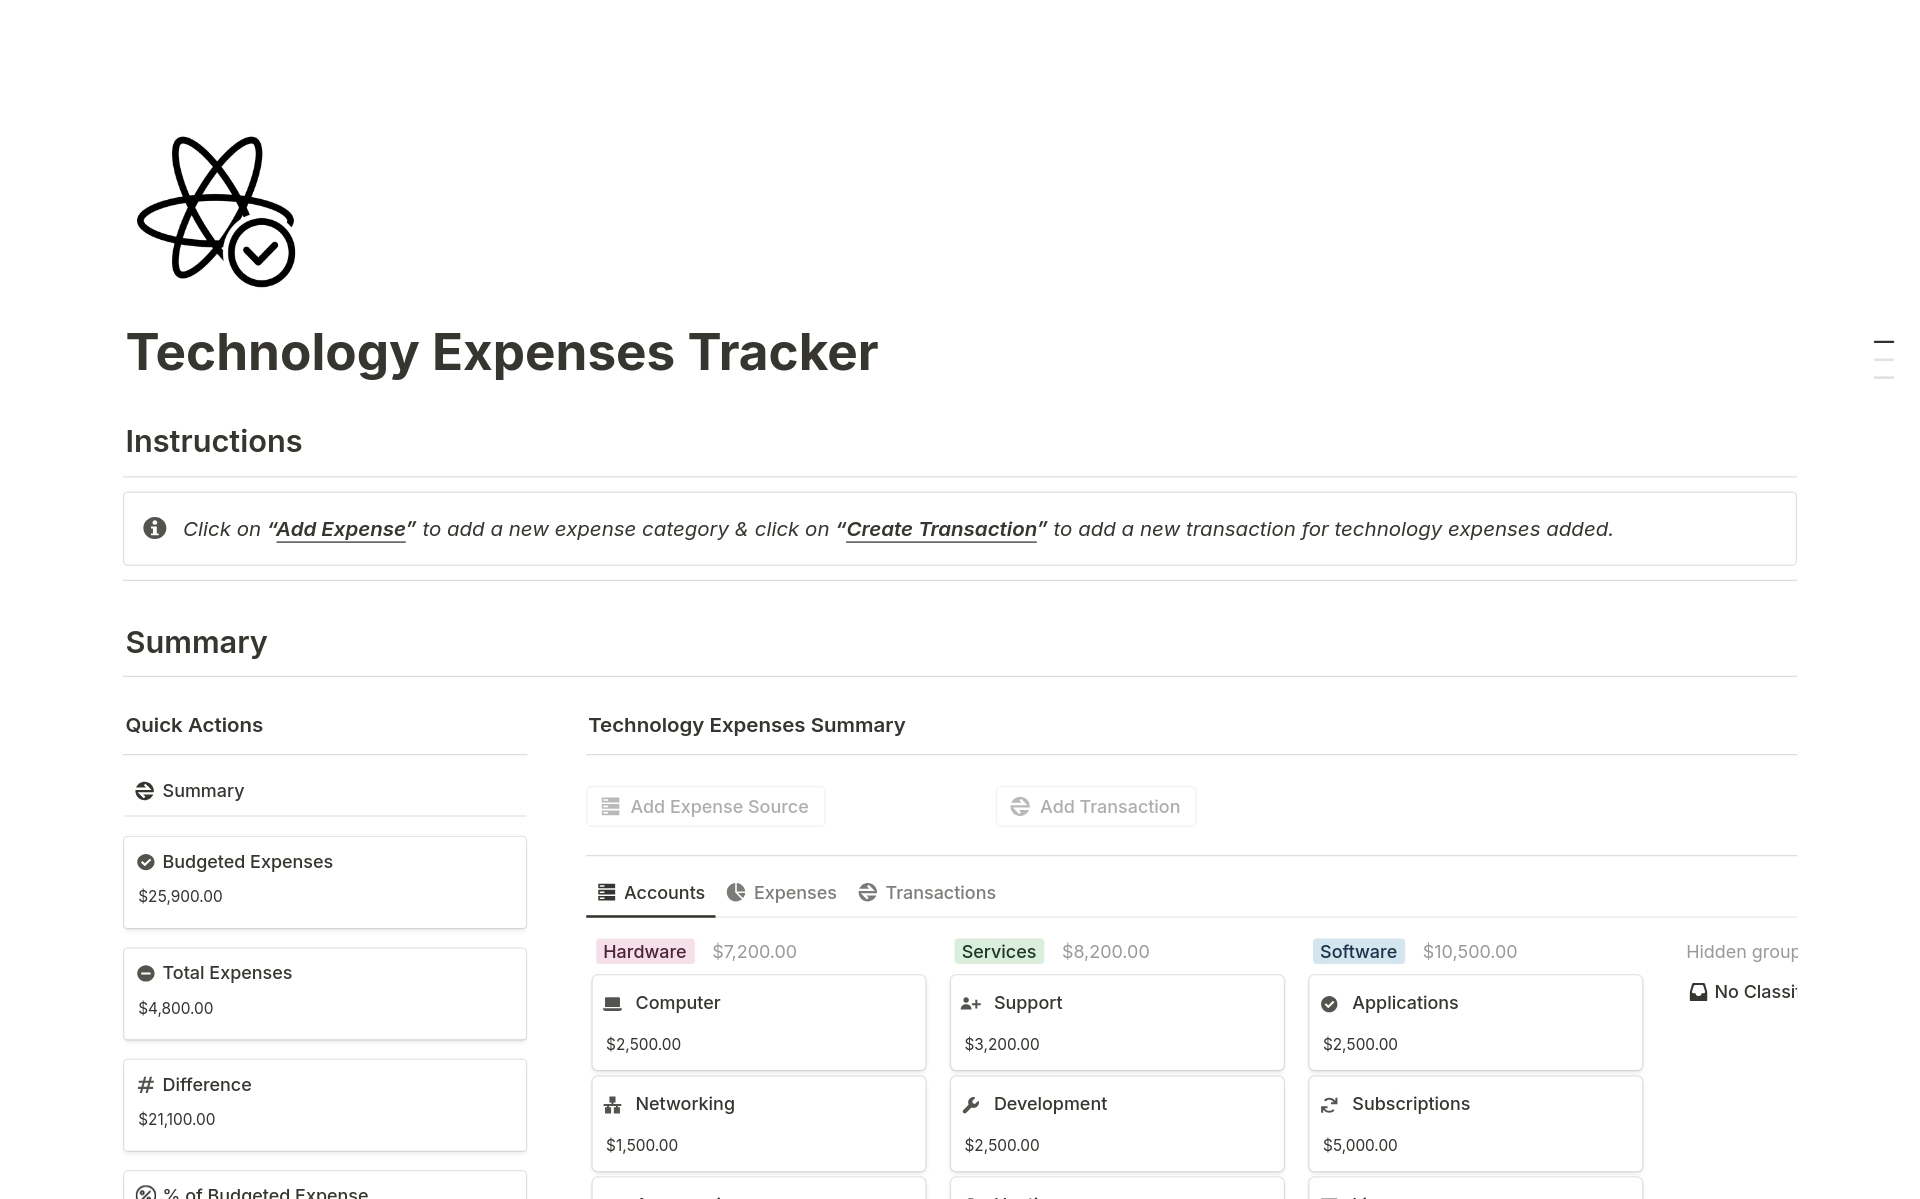 Ideal for those who are looking to manage their business technology expenses, this tracker helps you keep track of technology expenses such as hardware, software, services expenses and much more.